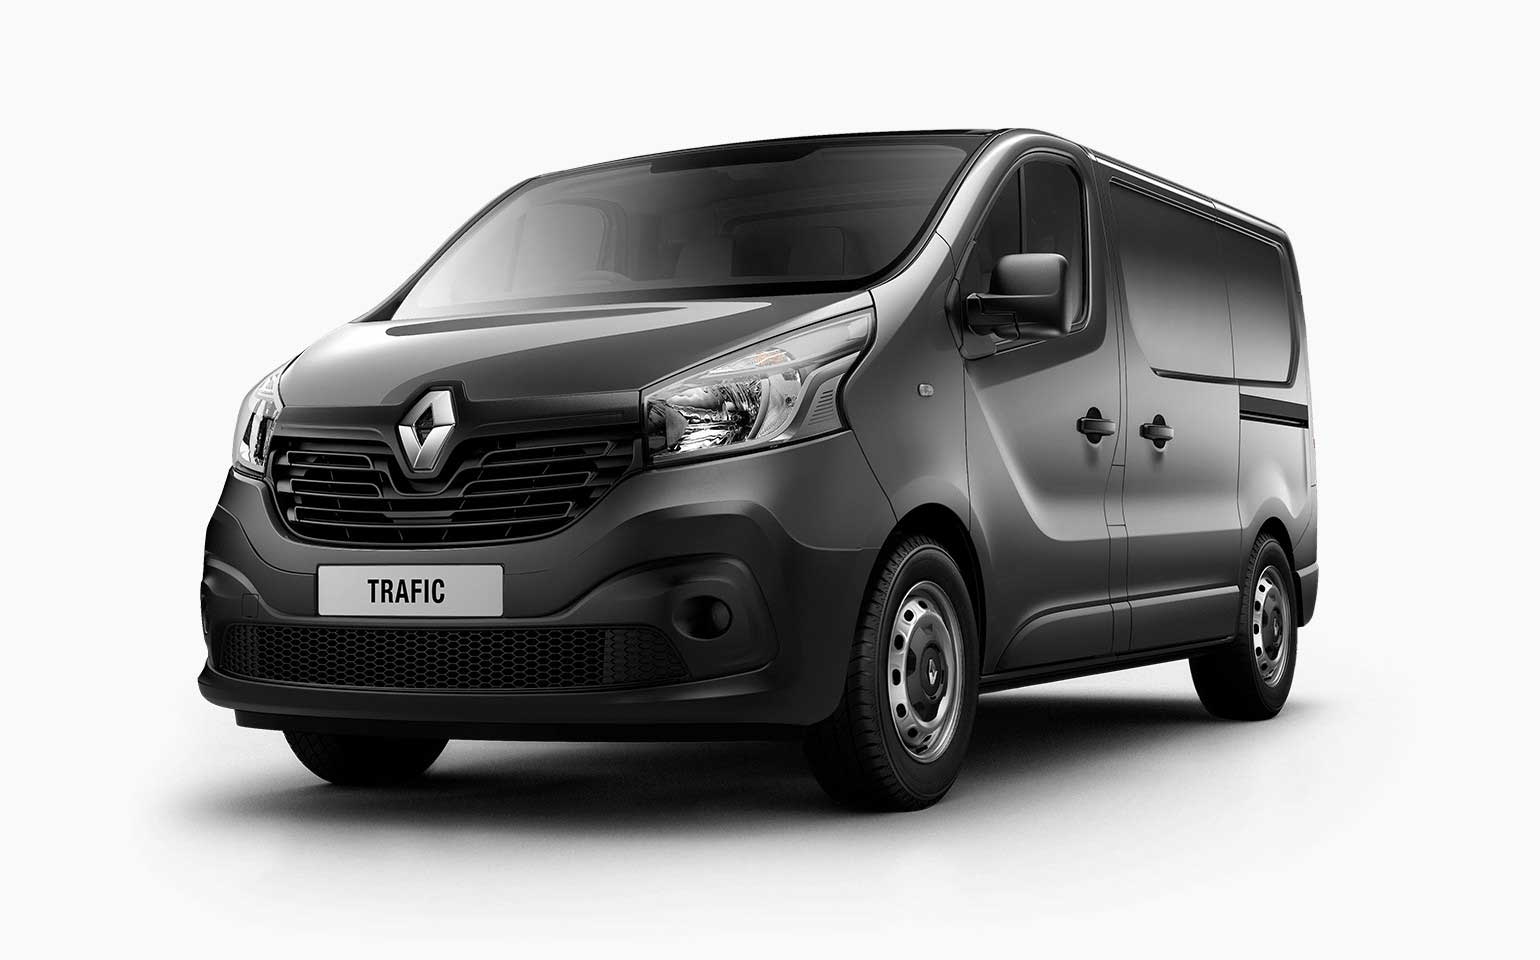 Renault Trafic Single Turbo Exterior outlook